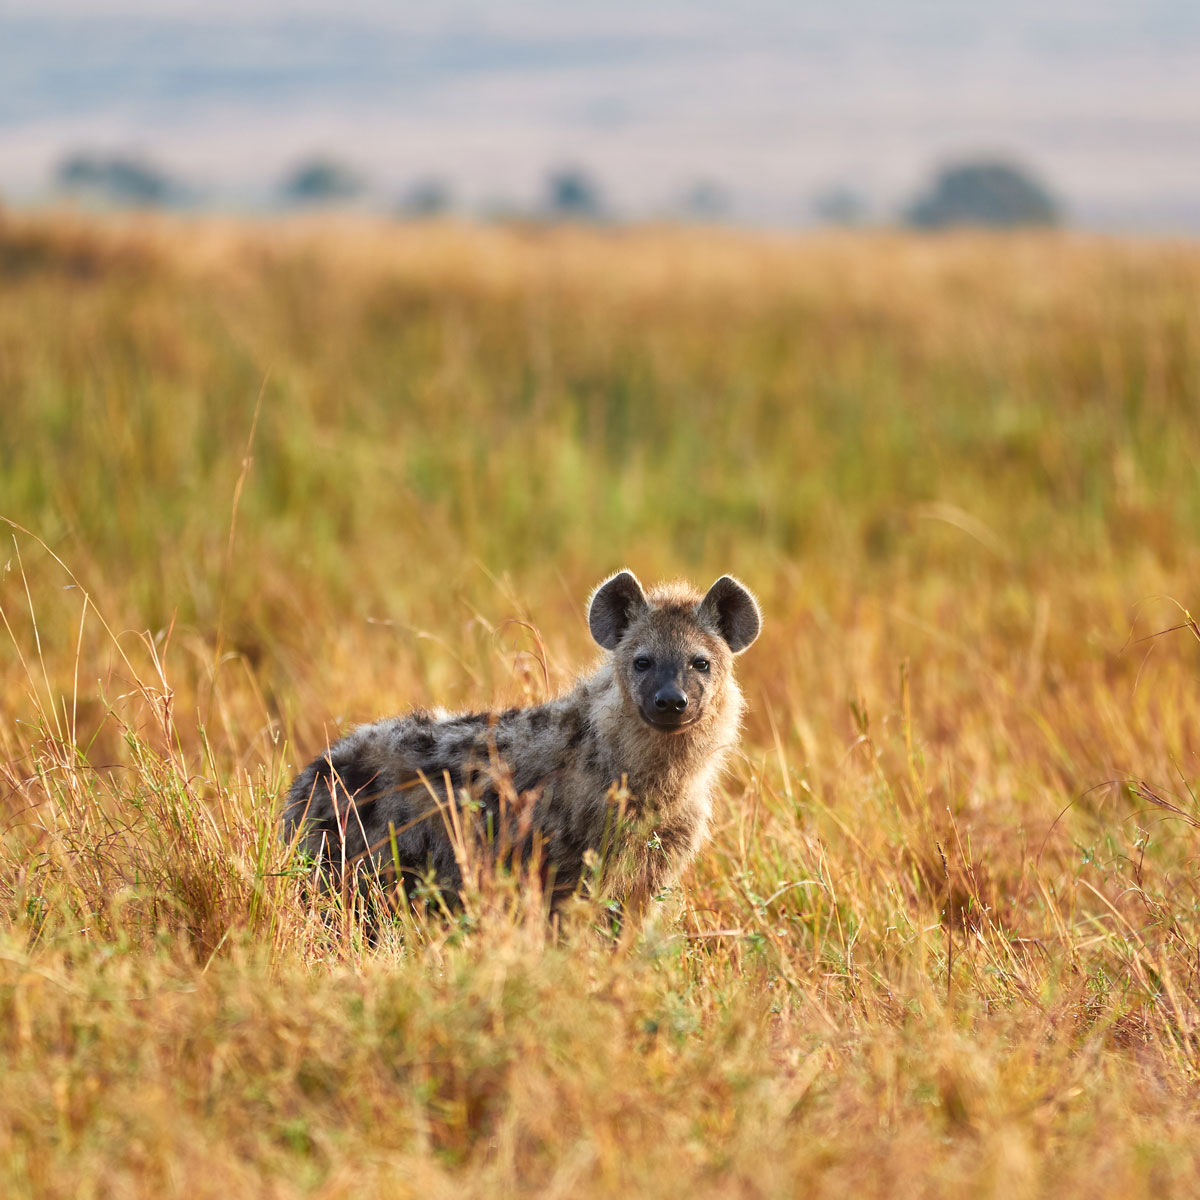 Image of a hyena in prairie field.